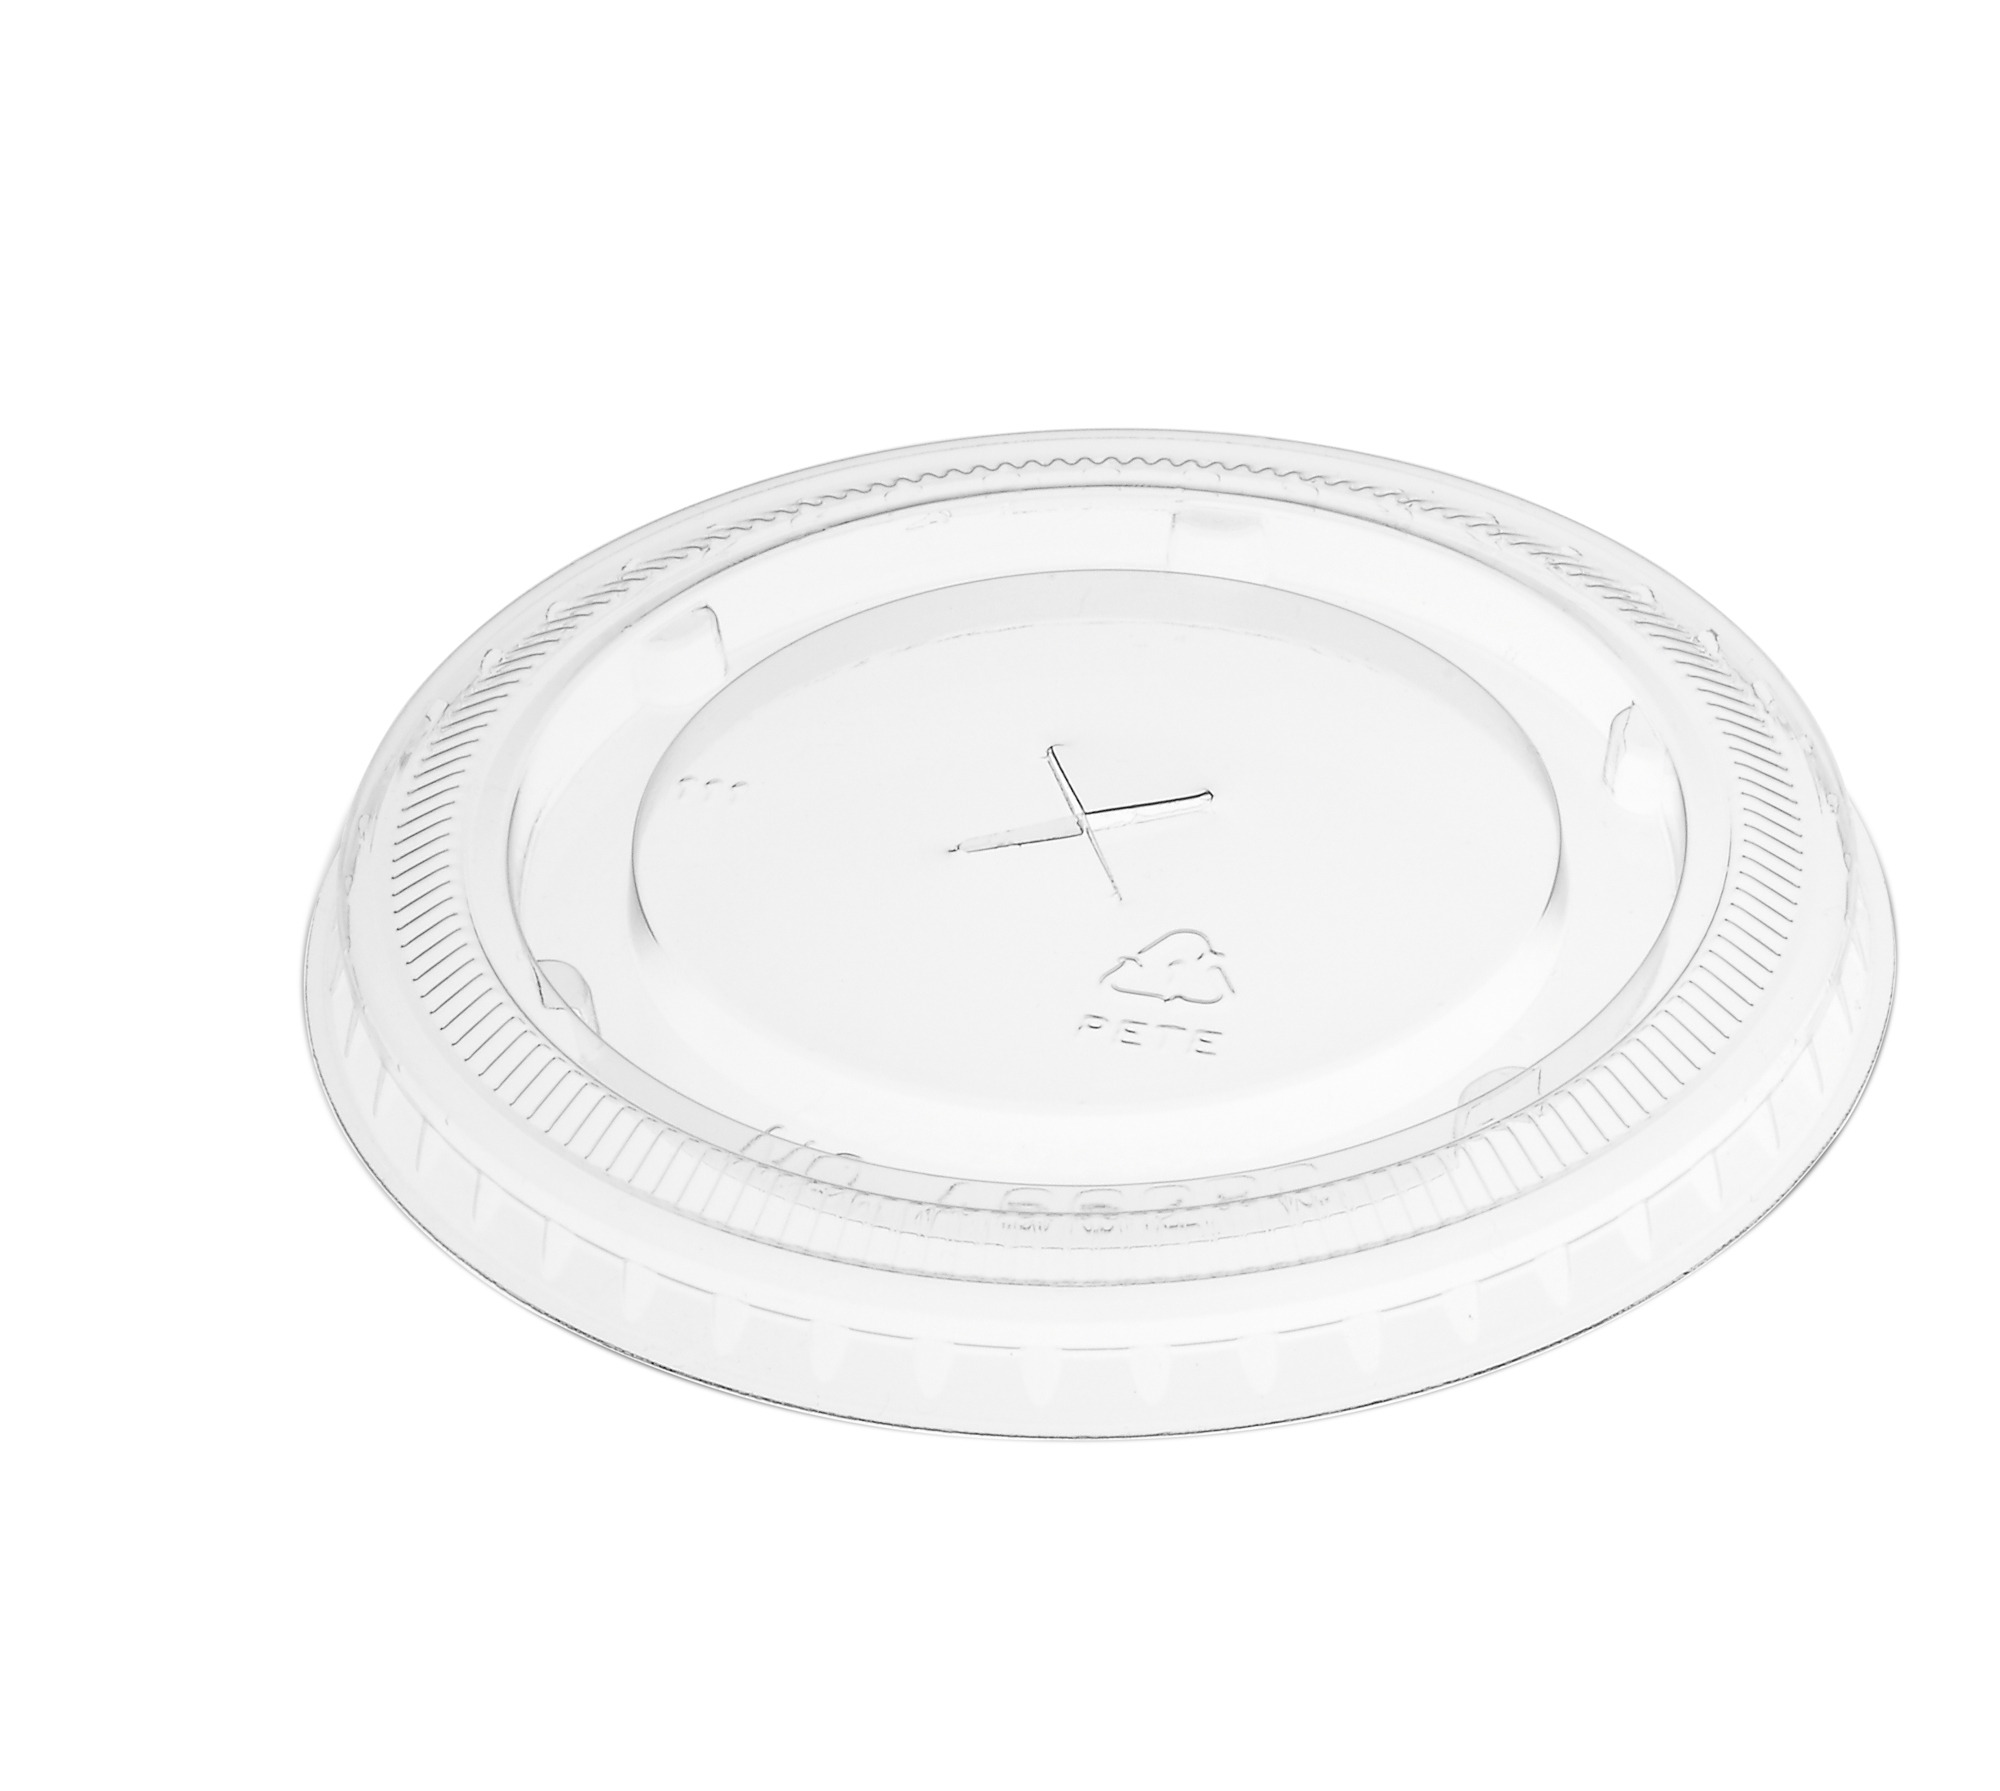 isolated product shot - cup lid with straw hole